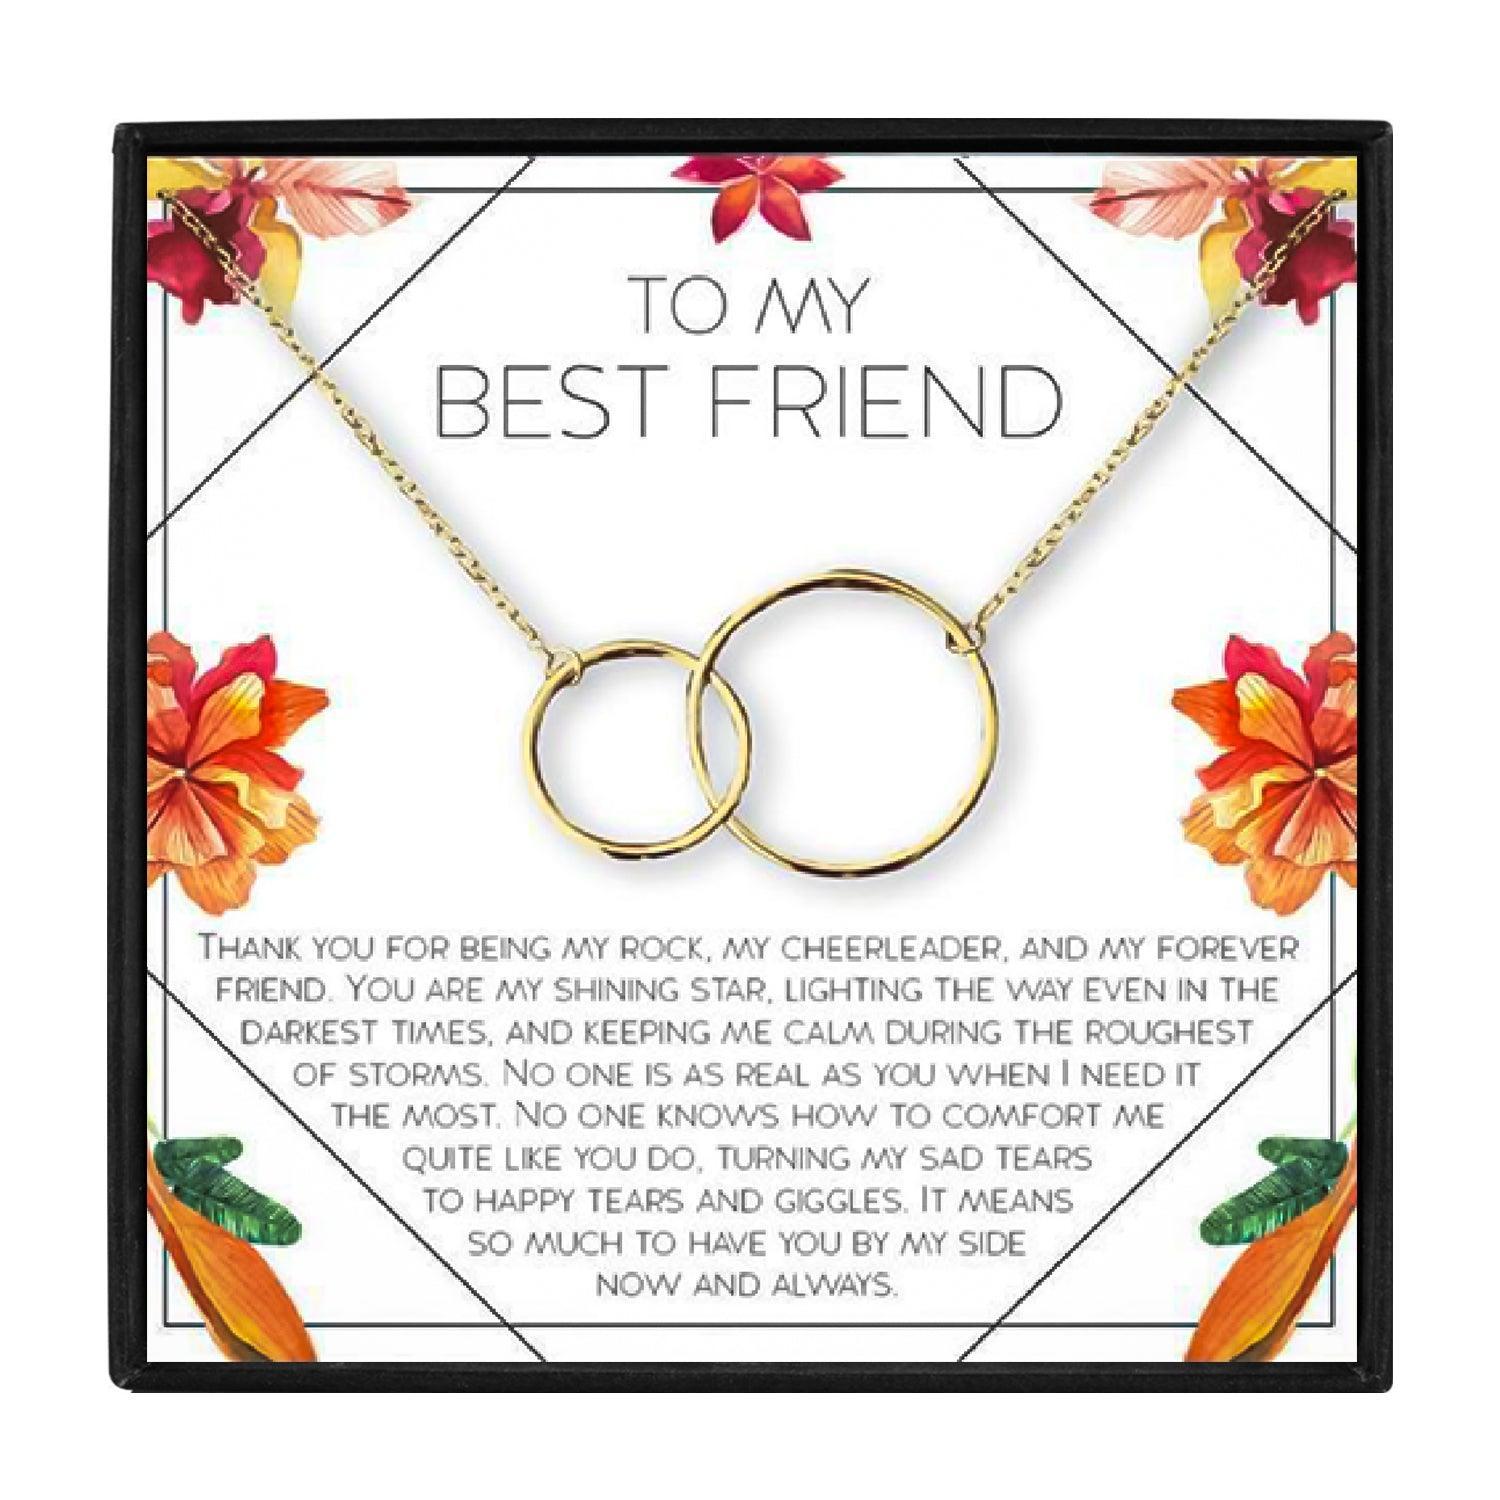 Rose Gold Necklace for Best Friends for Christmas 2023 | Rose Gold Necklace for Best Friends - undefined | Best Friends gift ideas, gift ideas, gift ideas for Best Friends, Rose Gold Necklace, Rose Gold Necklace for Best Friends | From Hunny Life | hunnylife.com